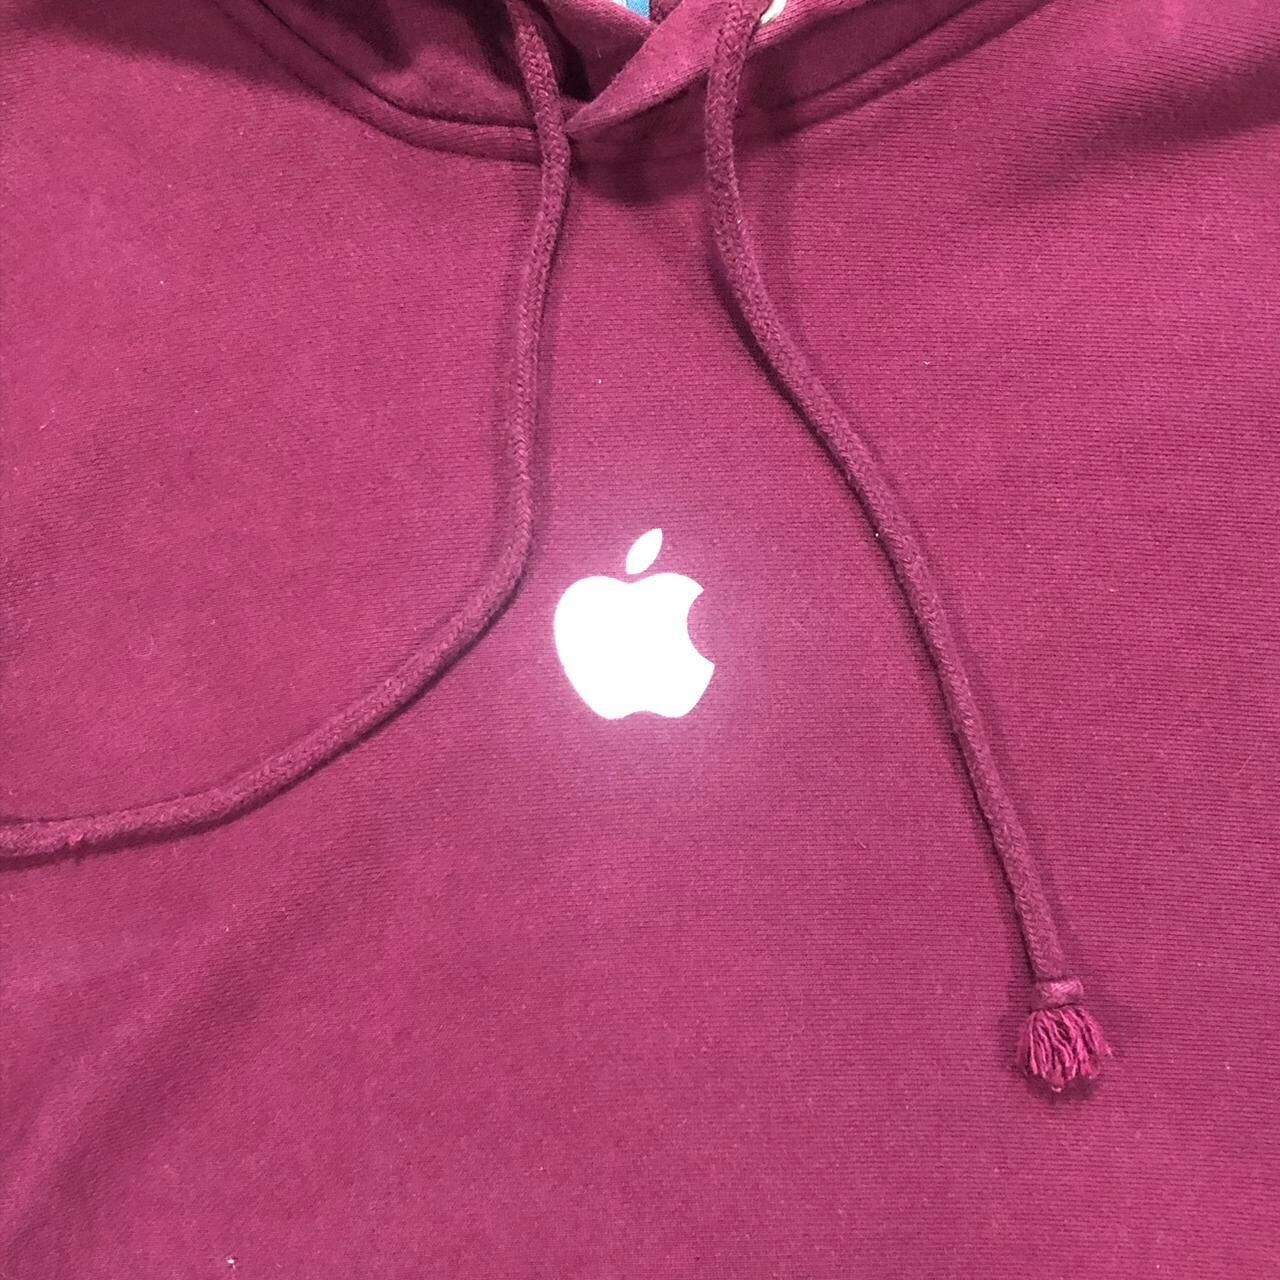 Product Image 3 - Vintage Apple hoodie. Some discoloring